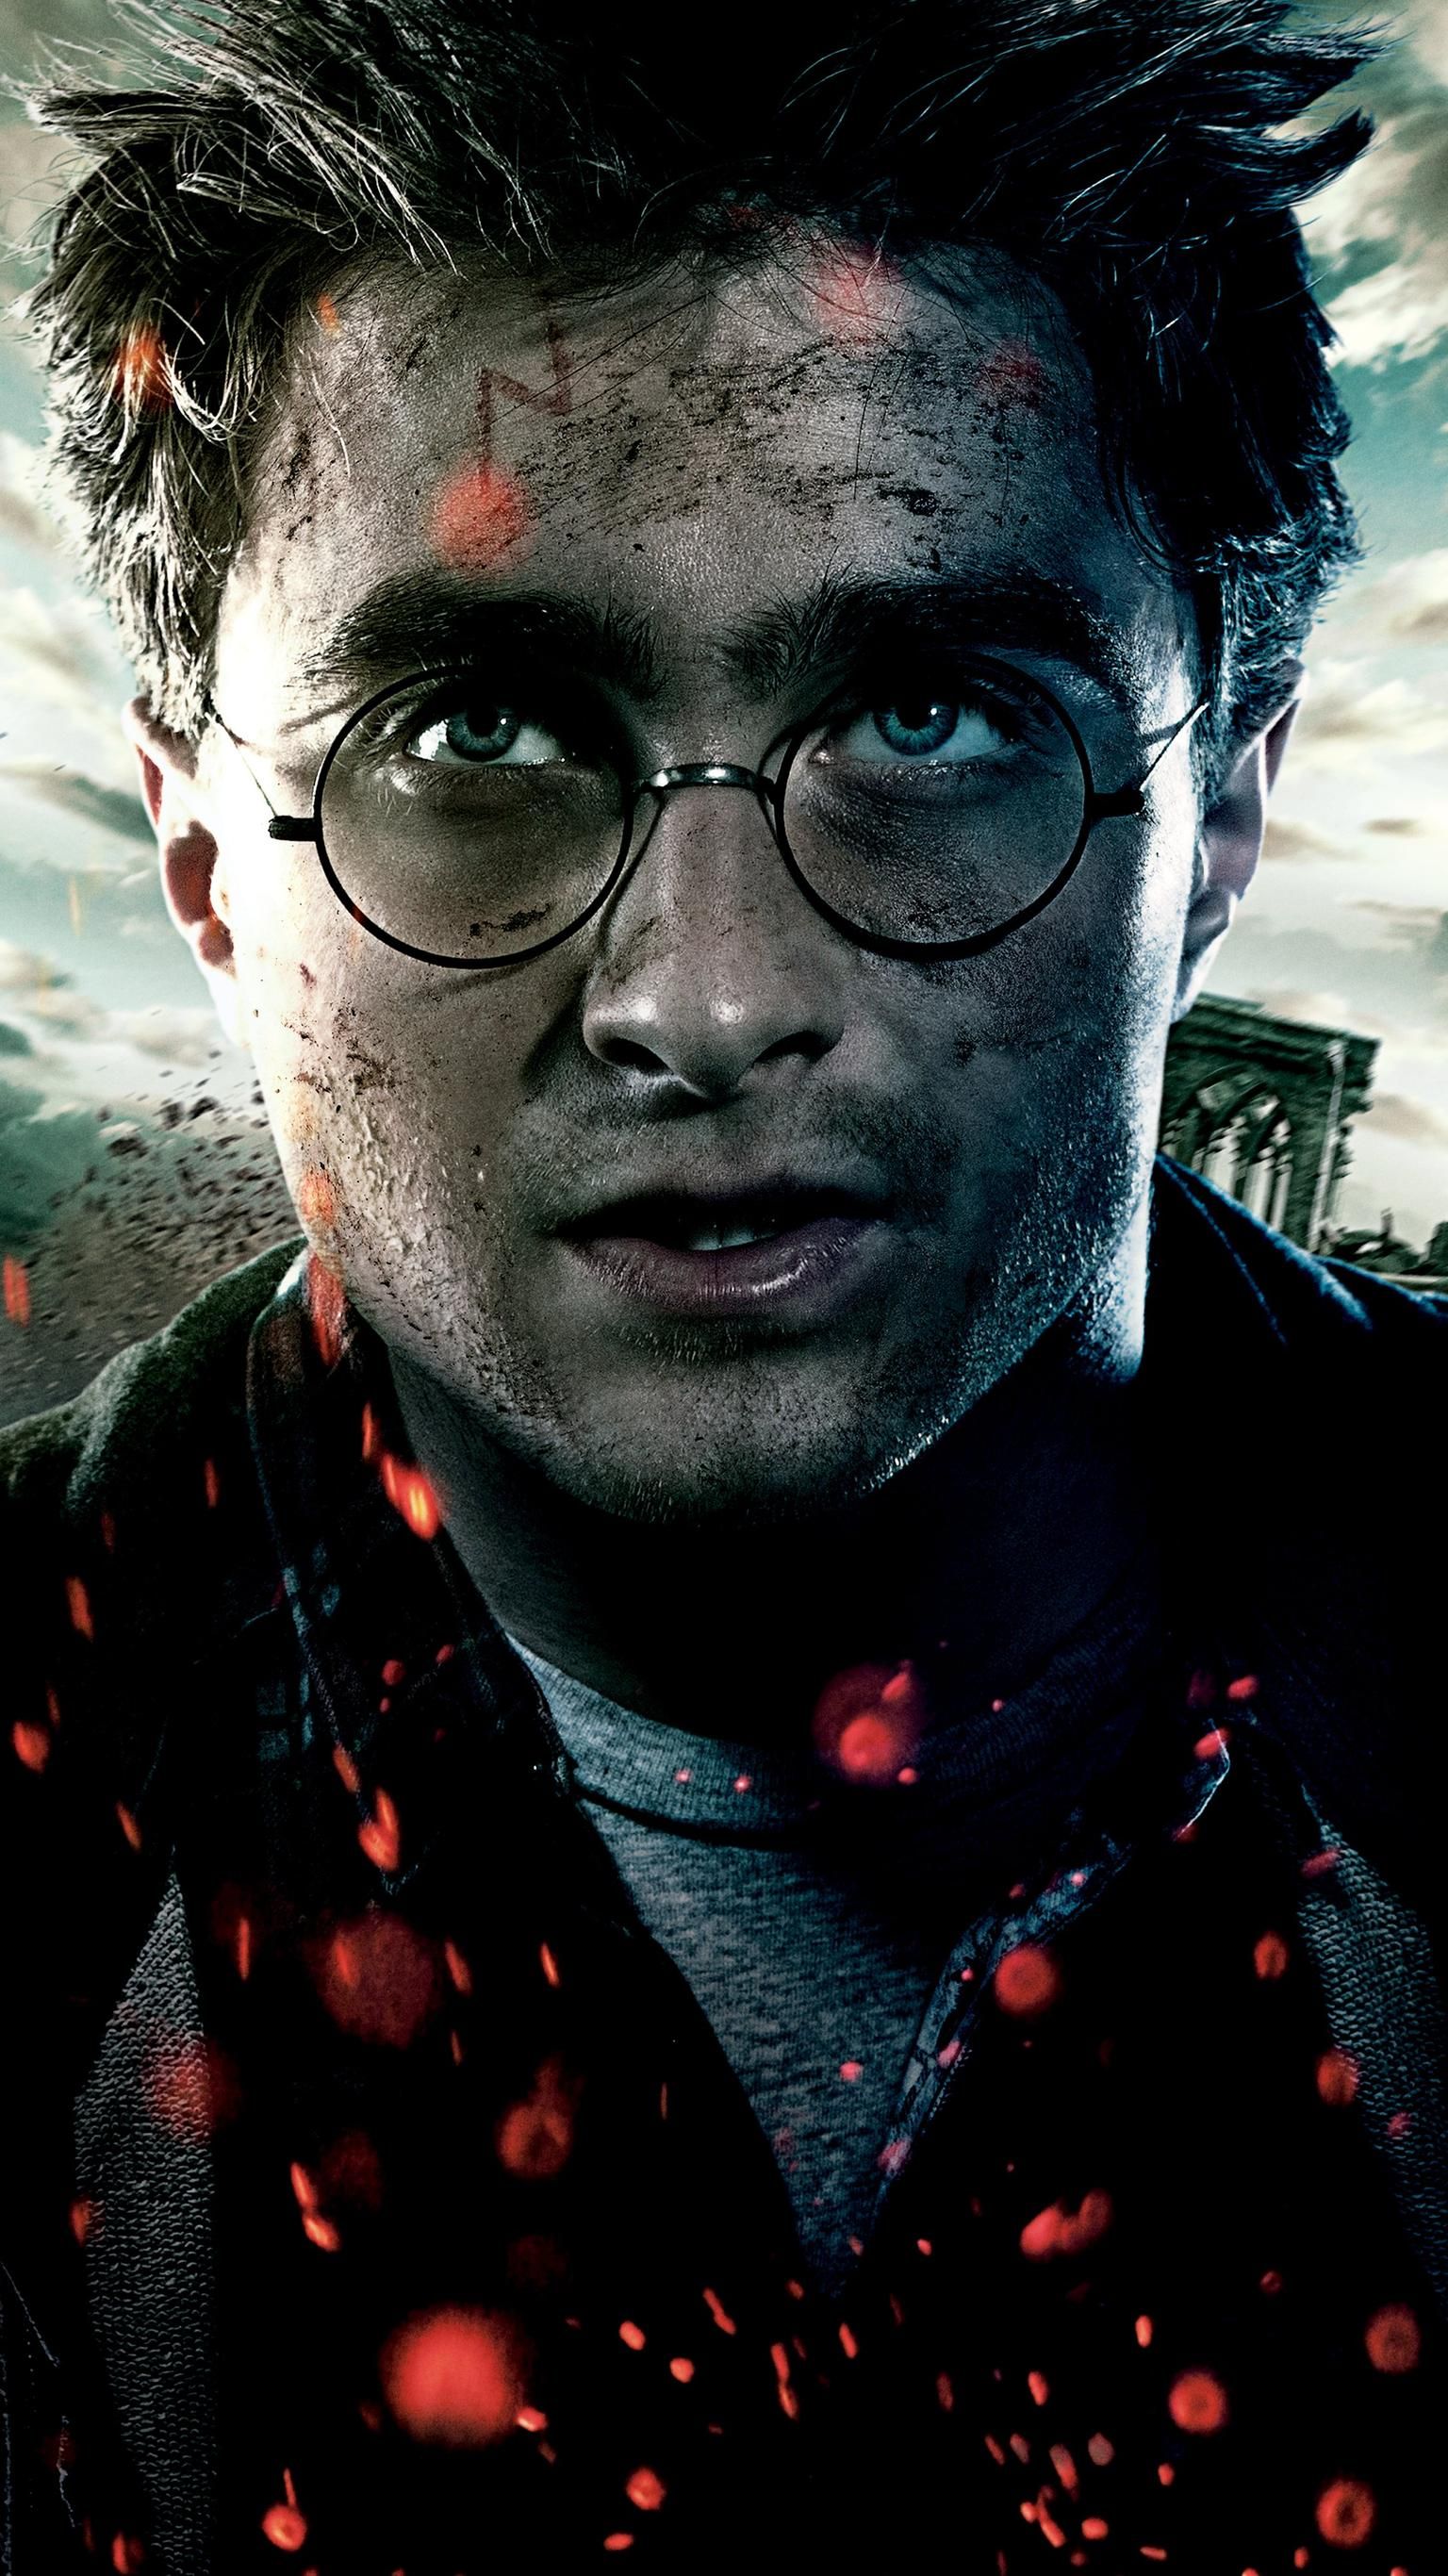 Harry Potter and the Deathly Hallows: Part 2 (2011) Phone Wallpaper. Moviemania. Harry potter deathly hallows, Harry potter wallpaper, Harry potter image